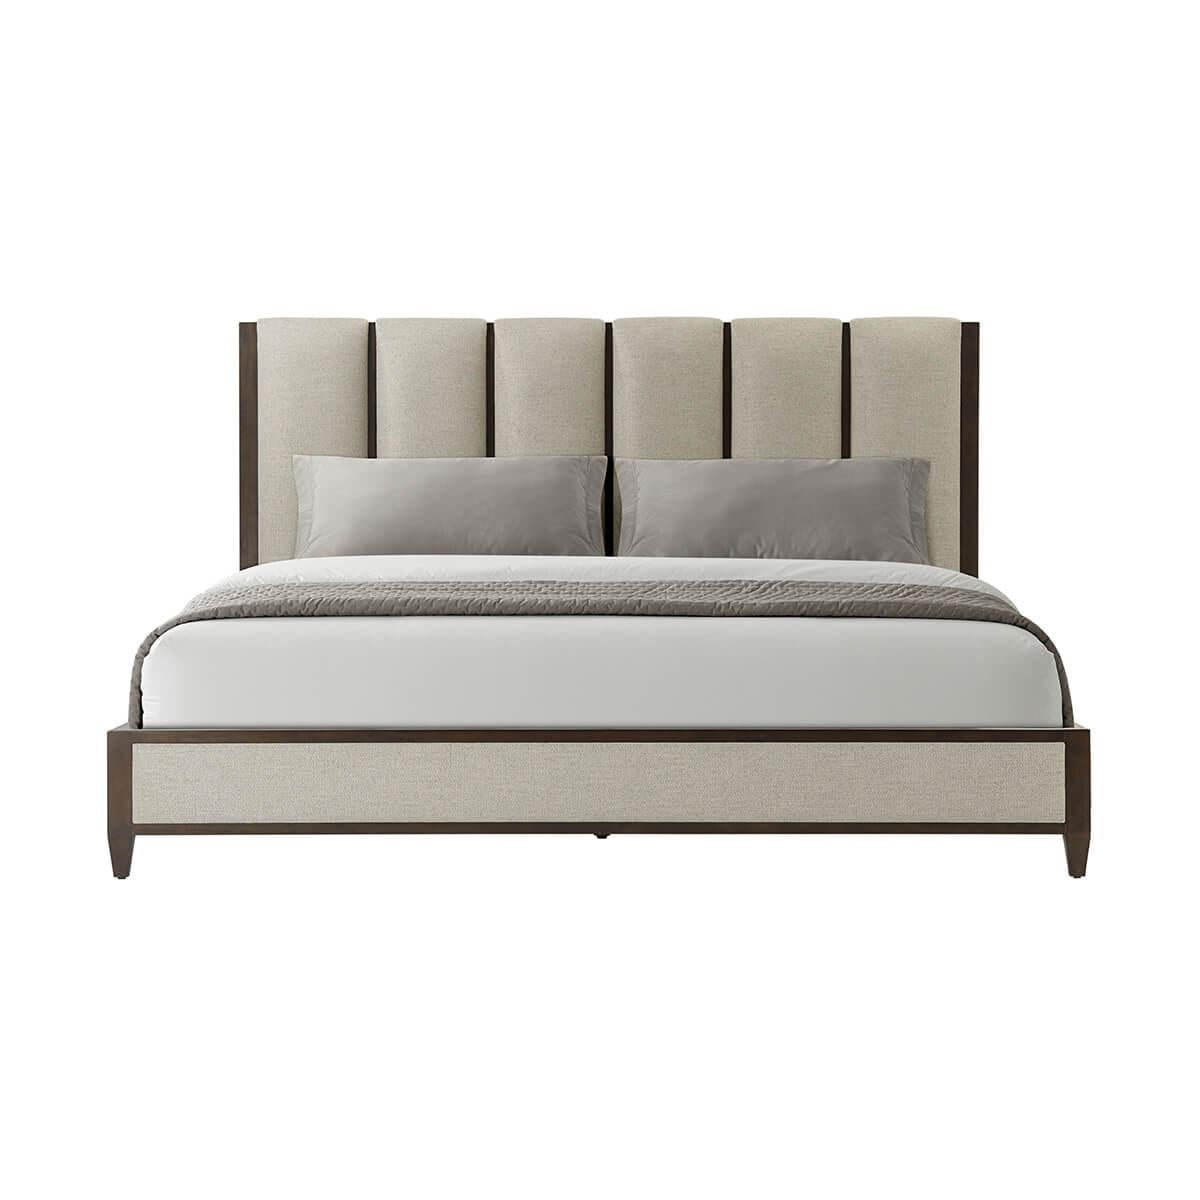 Featuring an upholstered platform frame and sophisticated channeled headboard, set within the dark Bistre finish.

Dimensions: 76